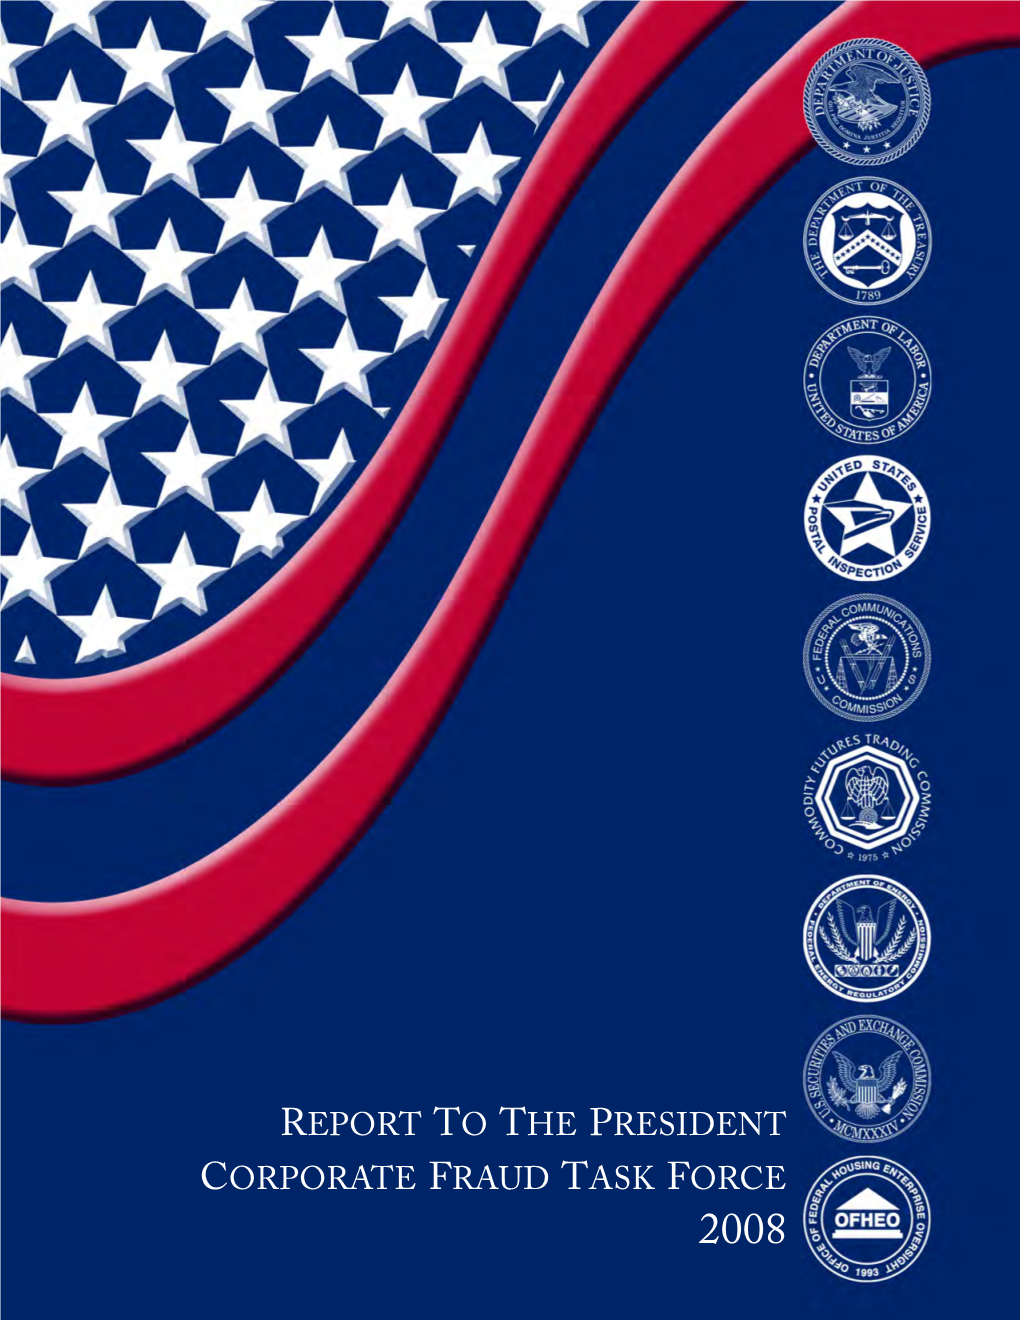 2008 Corporate Fraud Task Force Report to the President